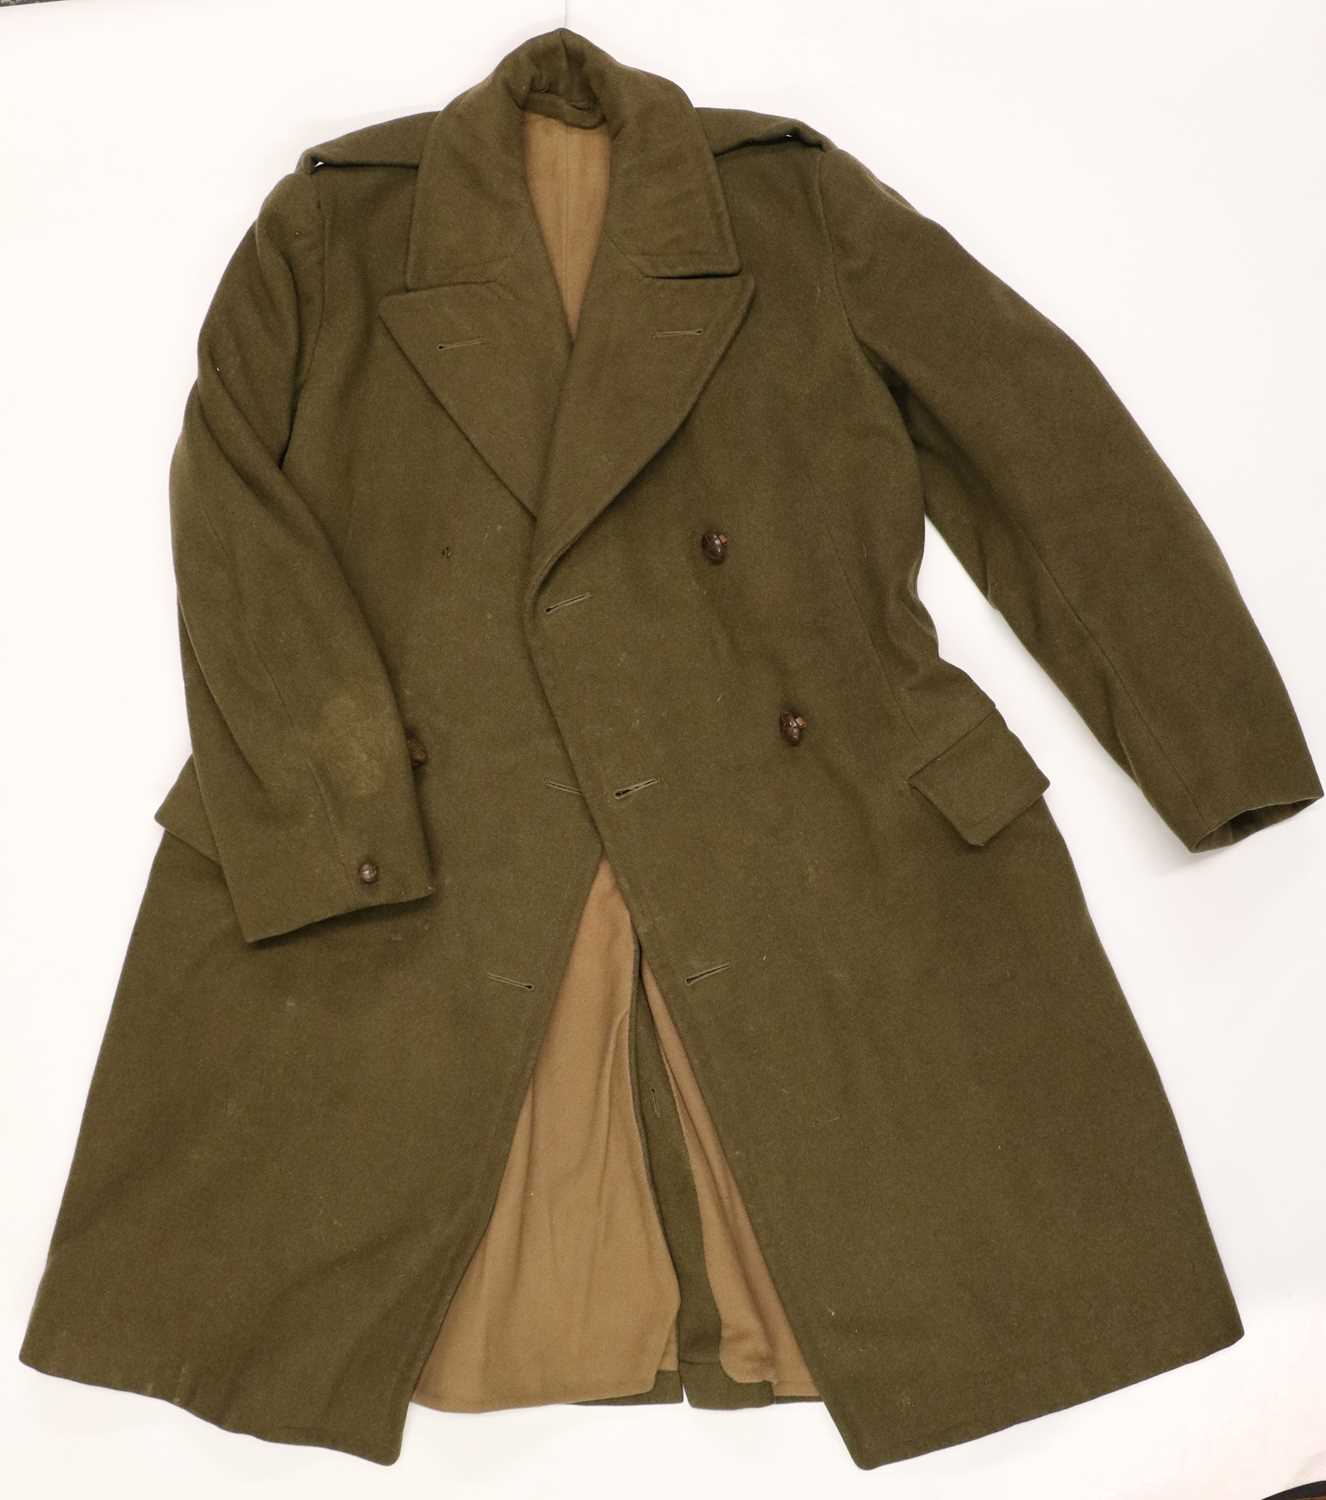 A Quantity of Second World War and Post-War Militaria, including a greatcoat with leather football - Image 2 of 5